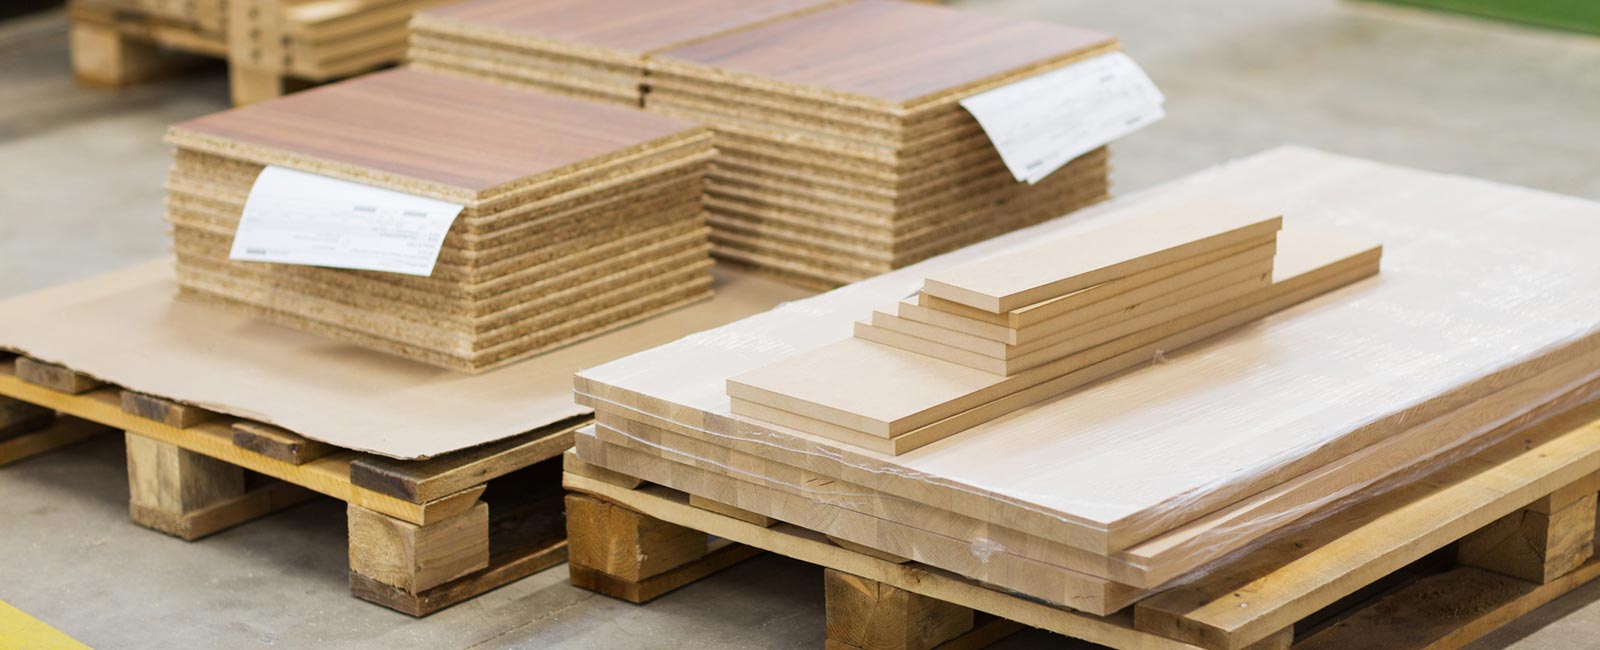 Mdf Vs Plywood Which One Should You Use For Your Next